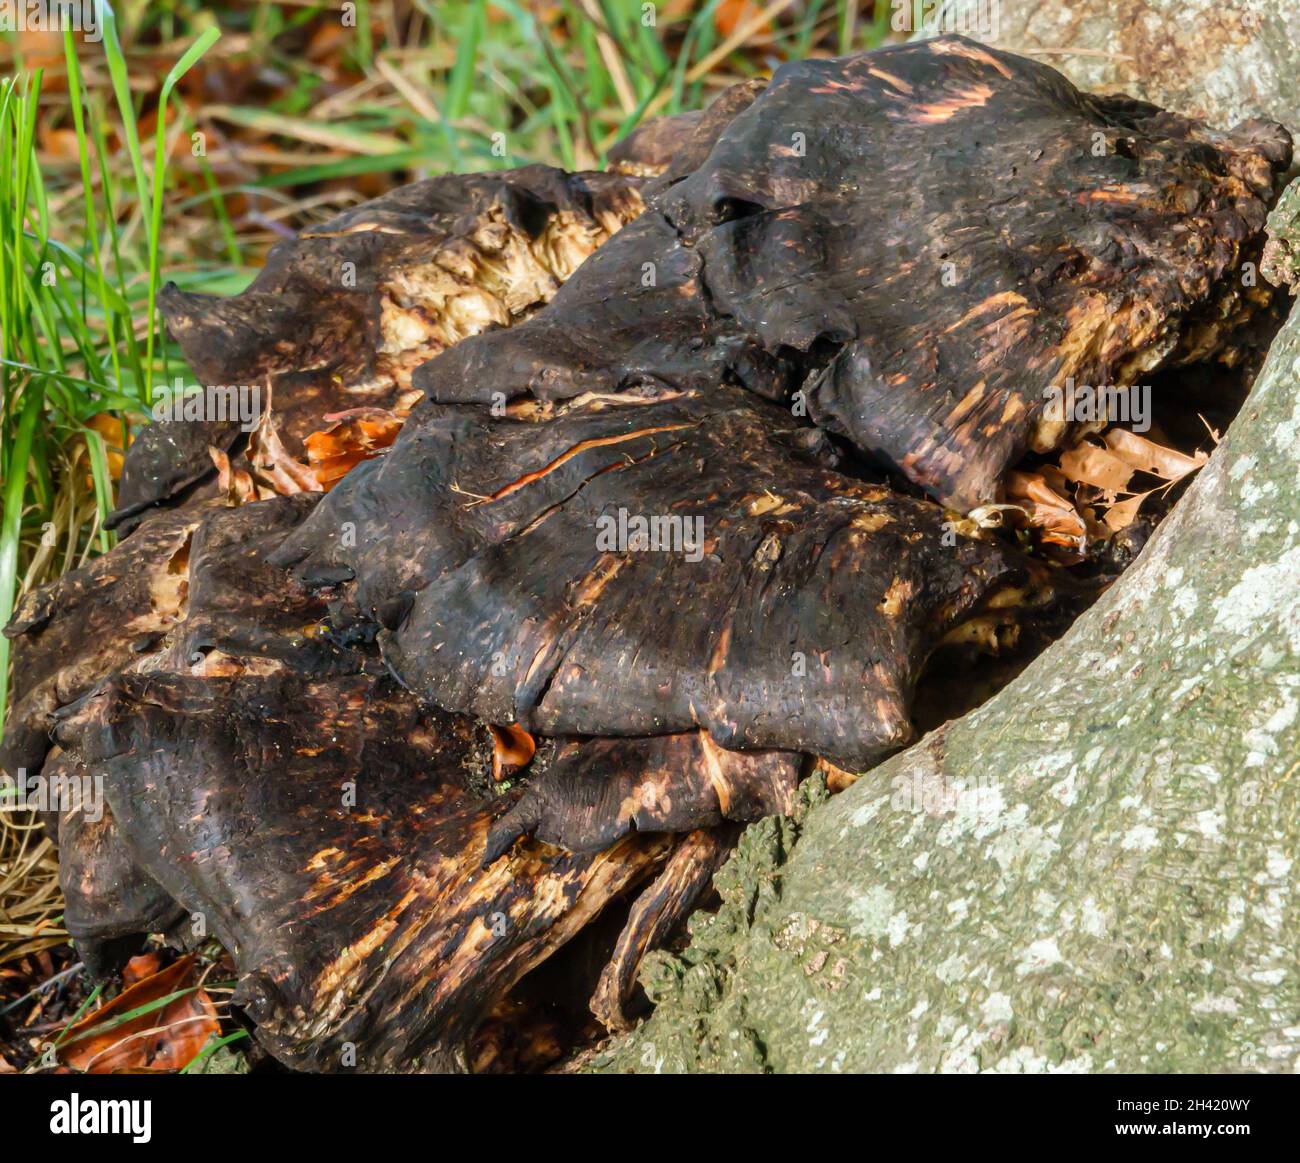 close up of a Chaga mushrooms (Inonotus obliquus) a fungus in the family Hymenochaetaceae. It is parasitic on birch and other trees. Stock Photo